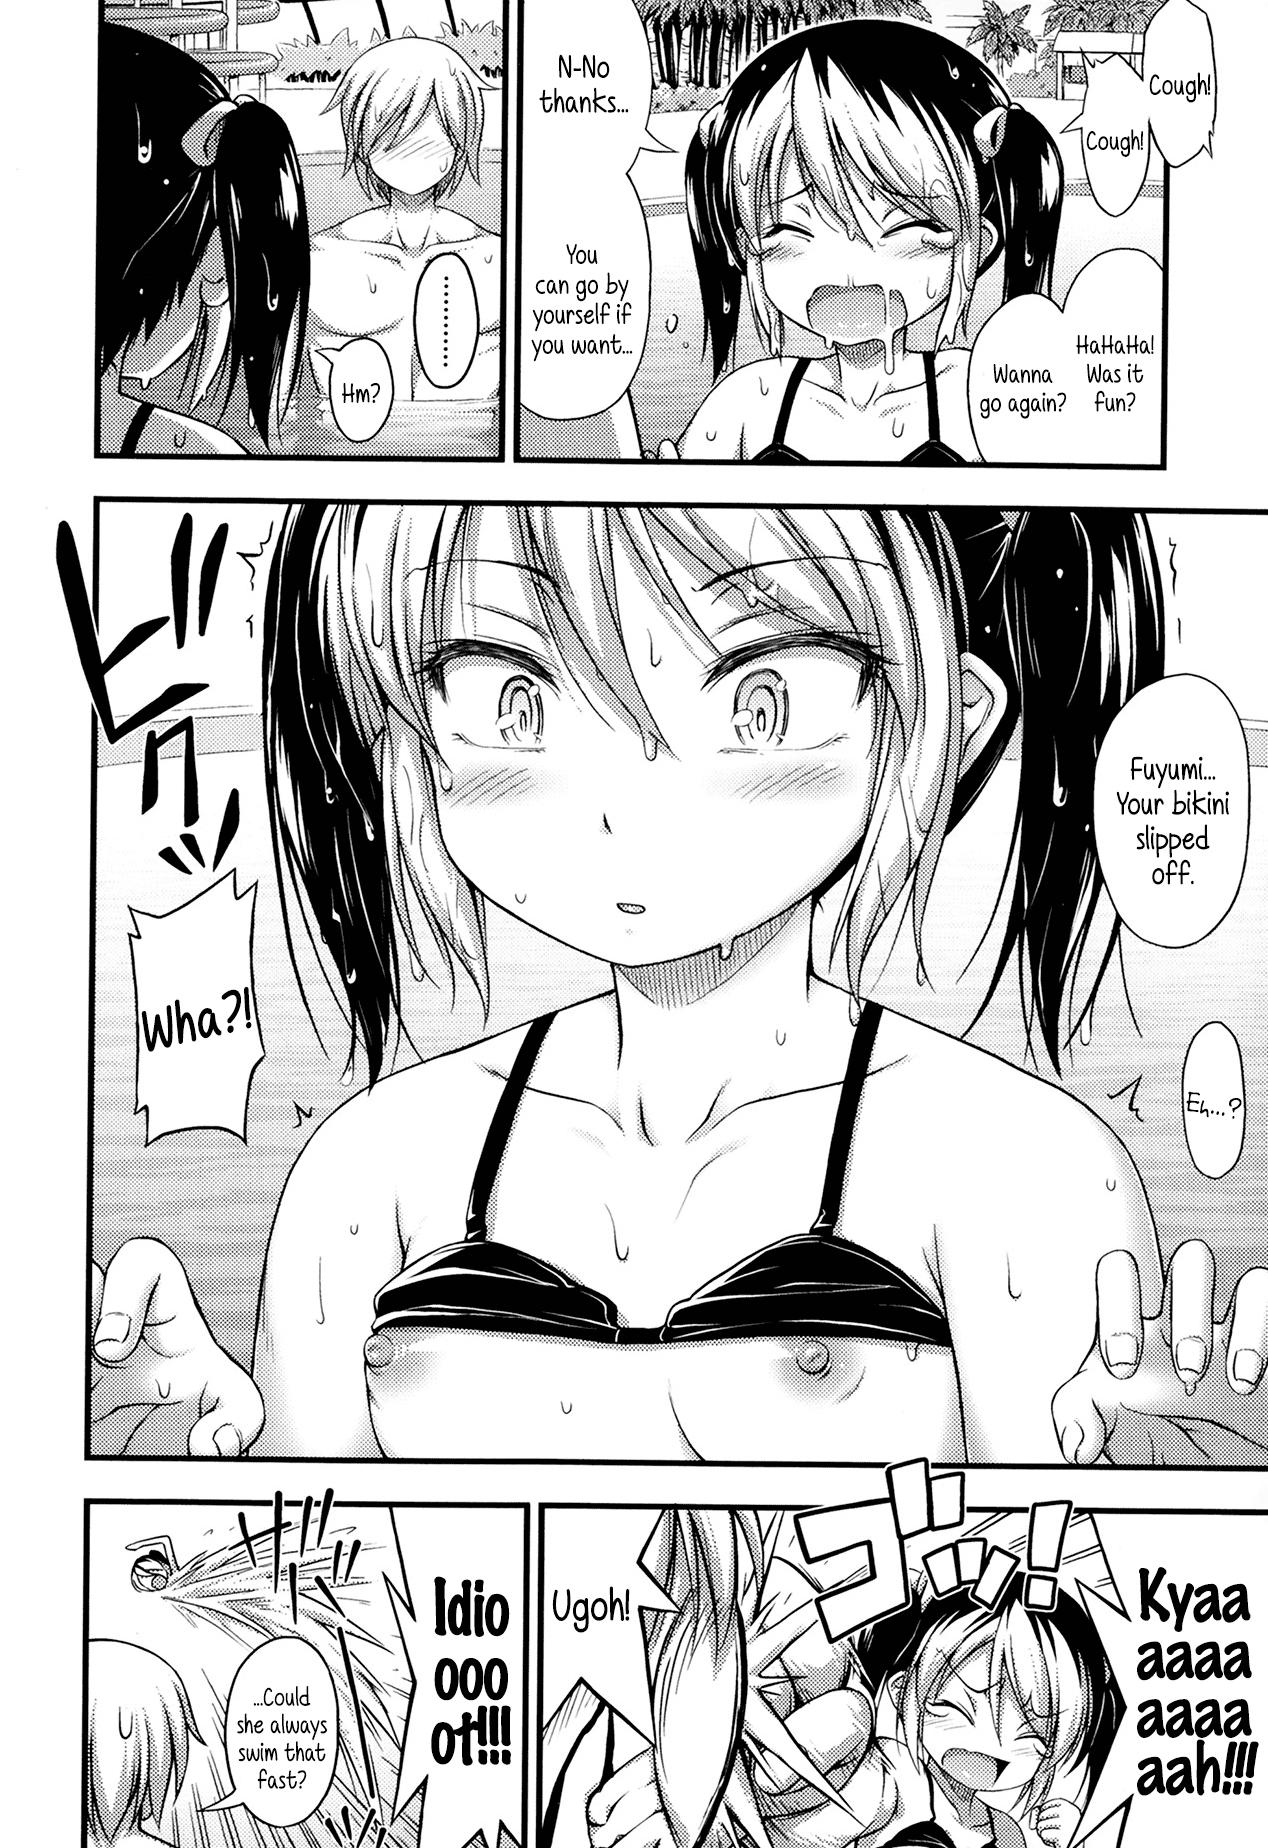 Outdoors Fuyuyasumi Poolside | Winter Vacation by the Pool Gapes Gaping Asshole - Page 4